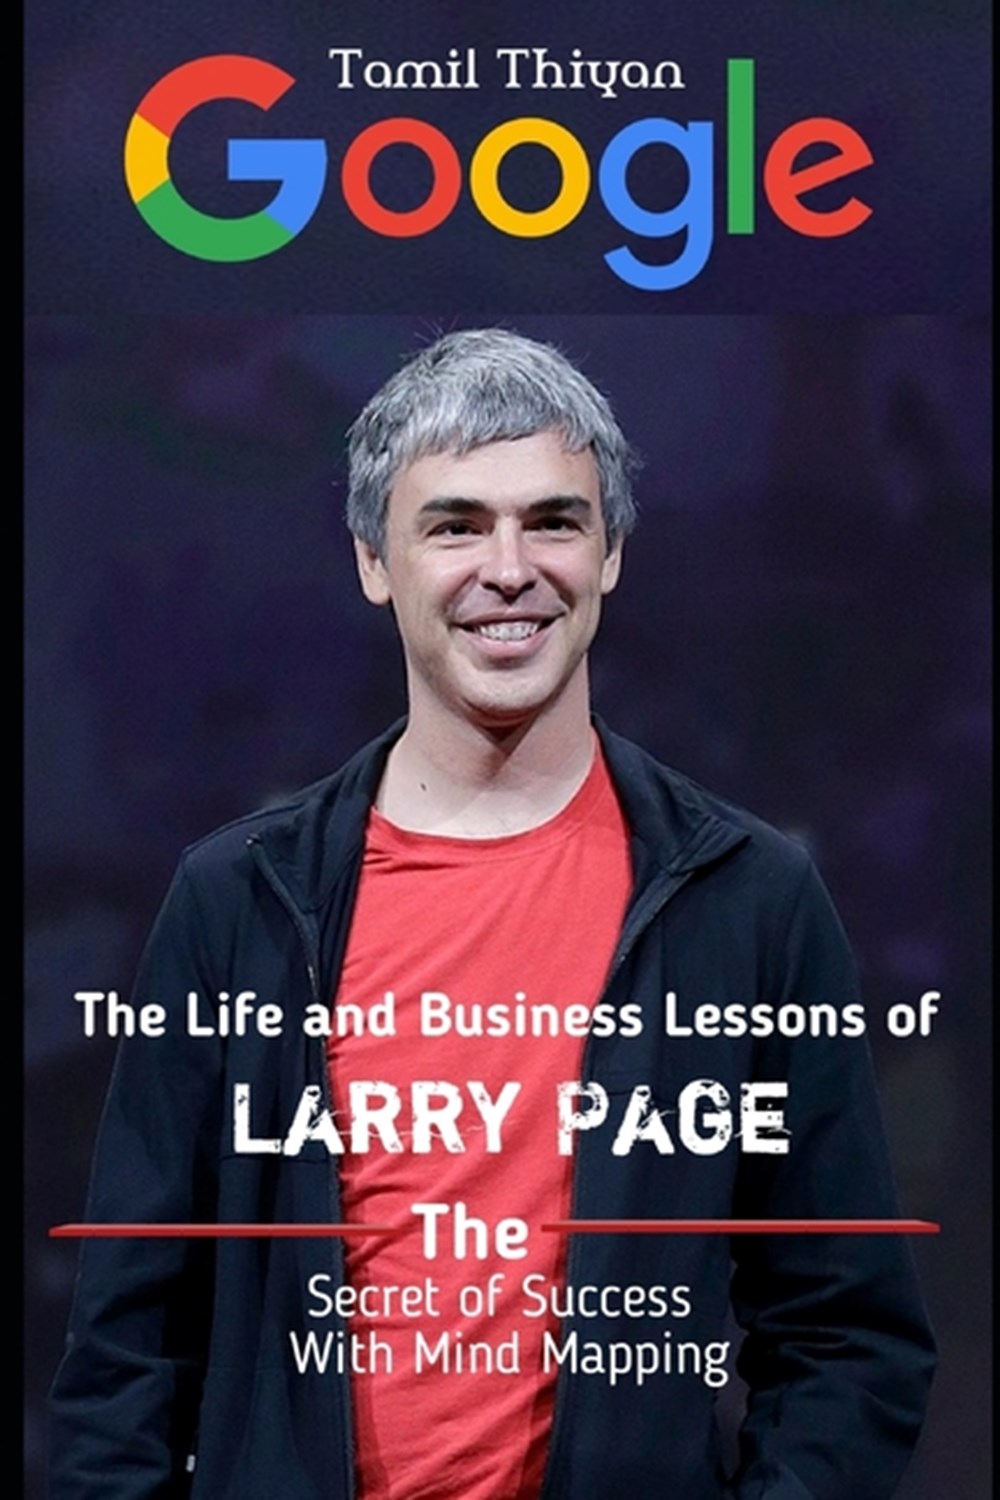 Life and Business lessons of Larry page (The Secret of Success With Mind Mapping)